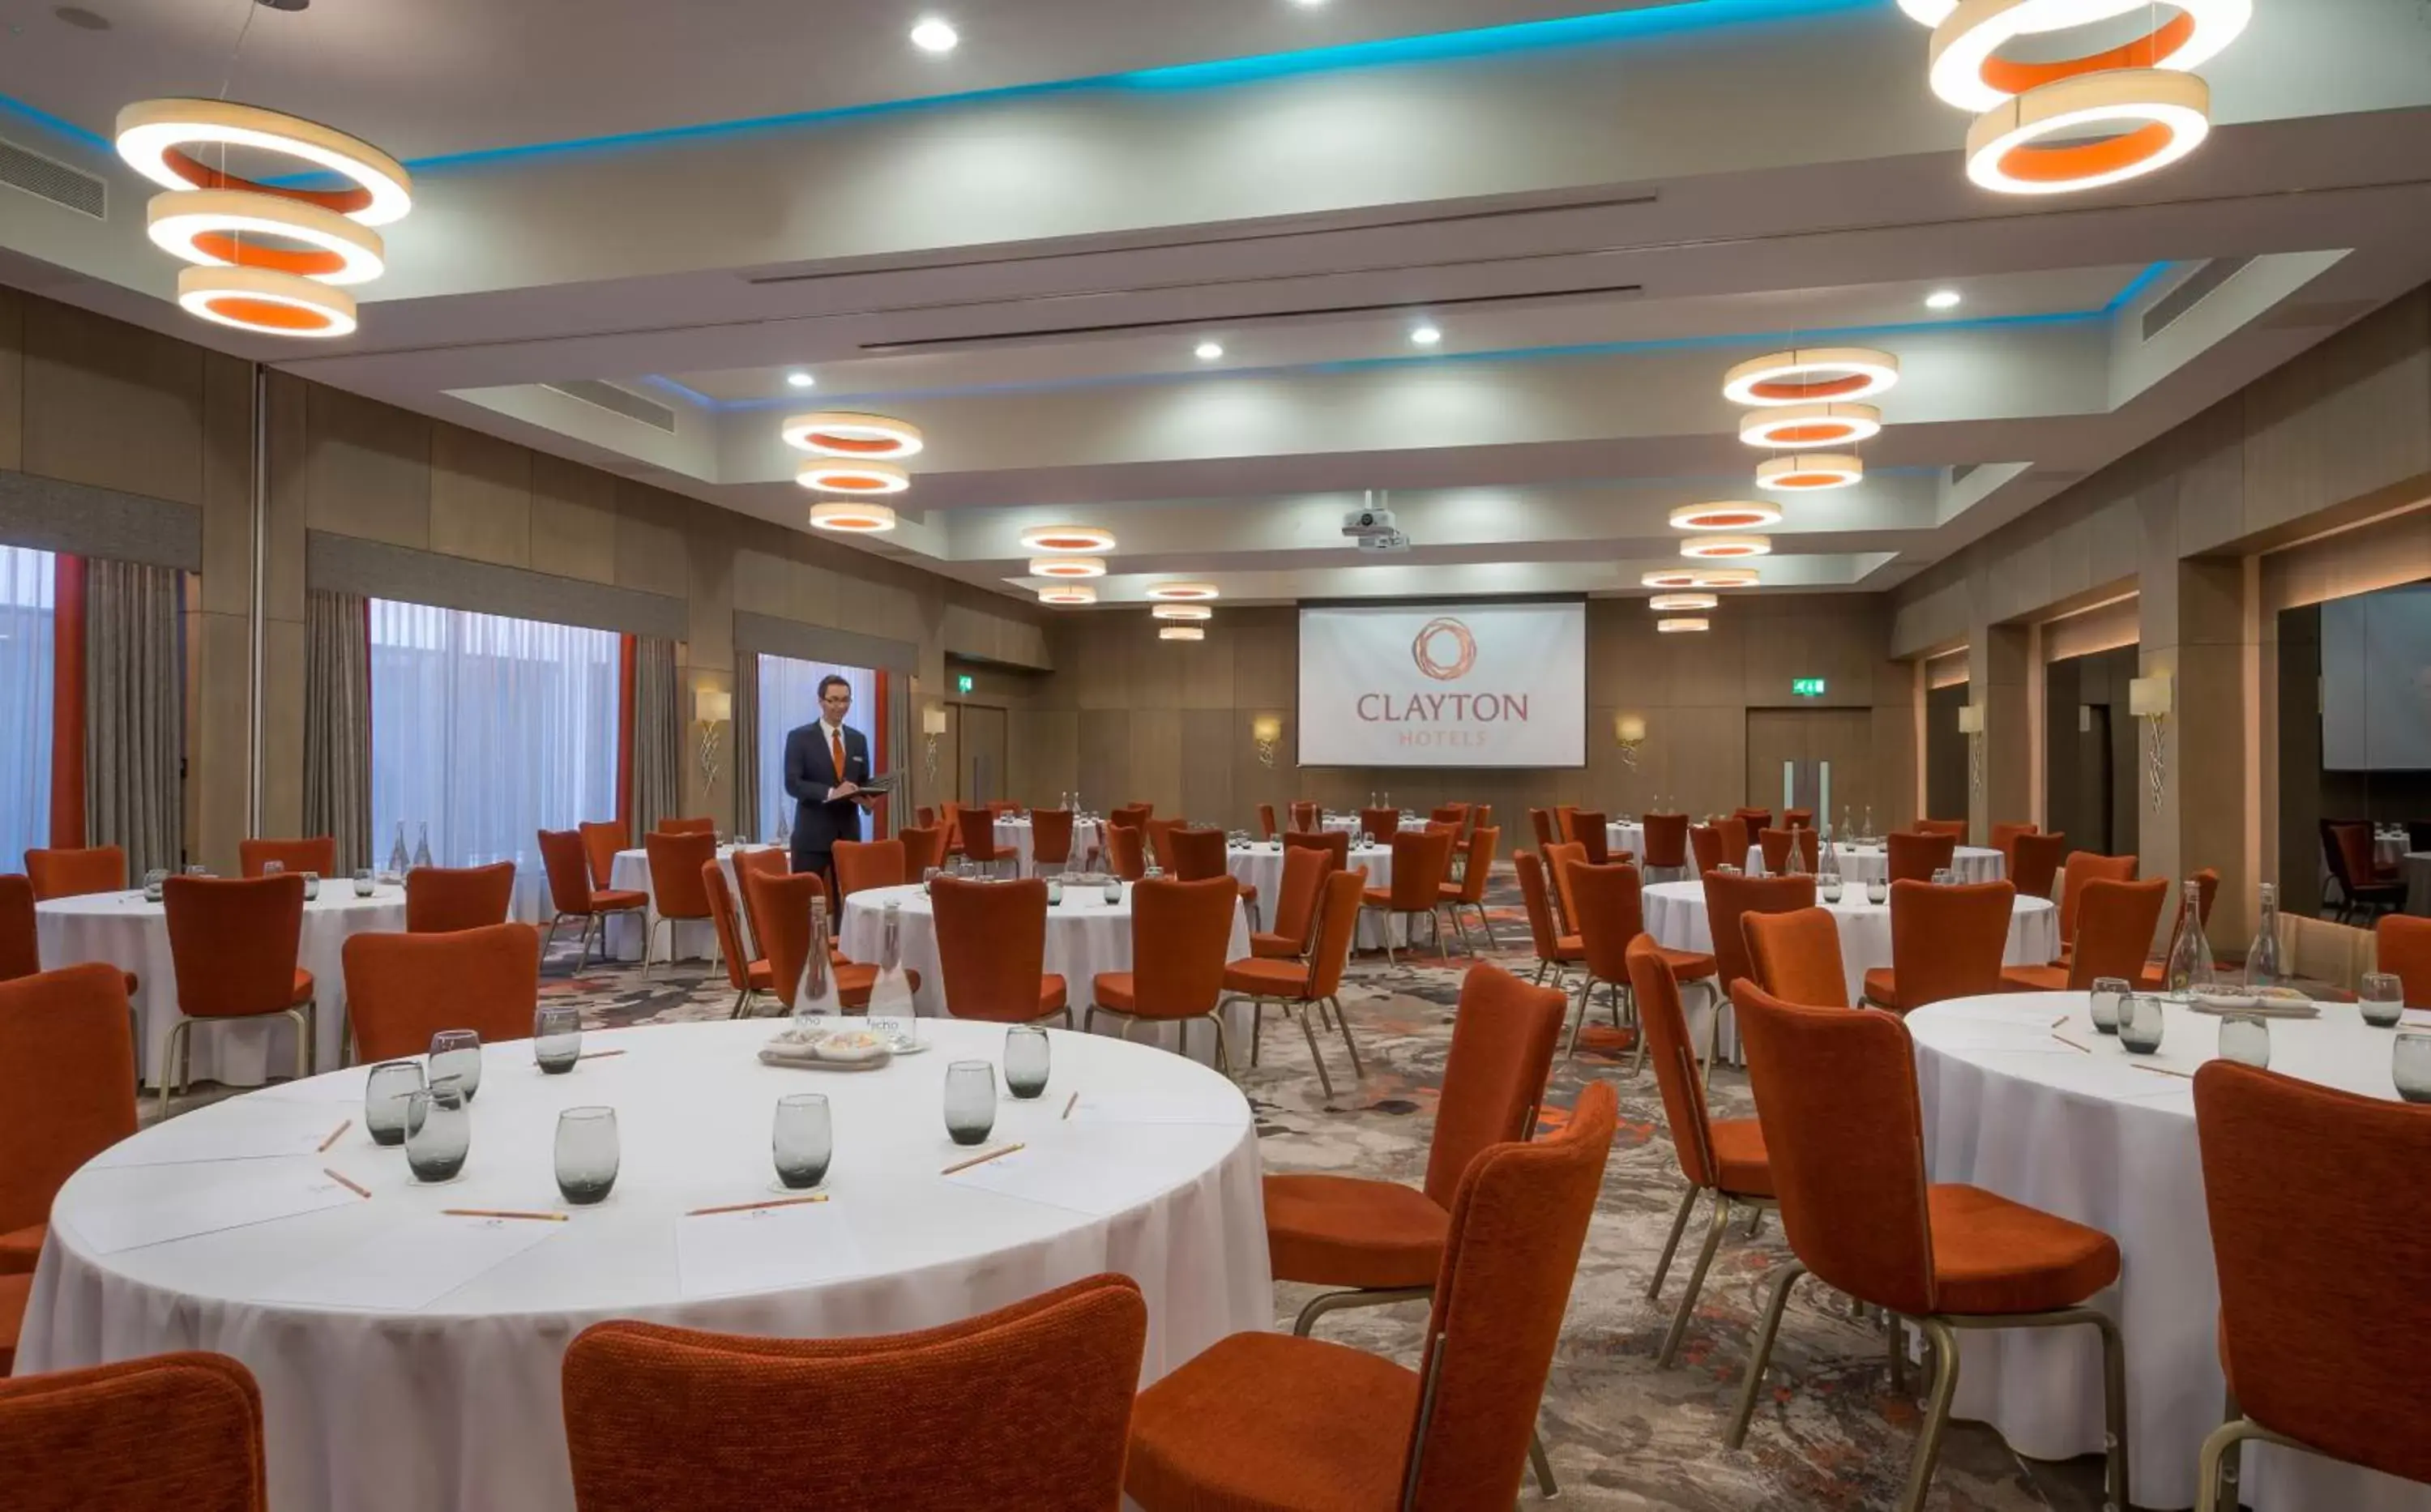 Meeting/conference room, Banquet Facilities in Clayton Hotel Chiswick